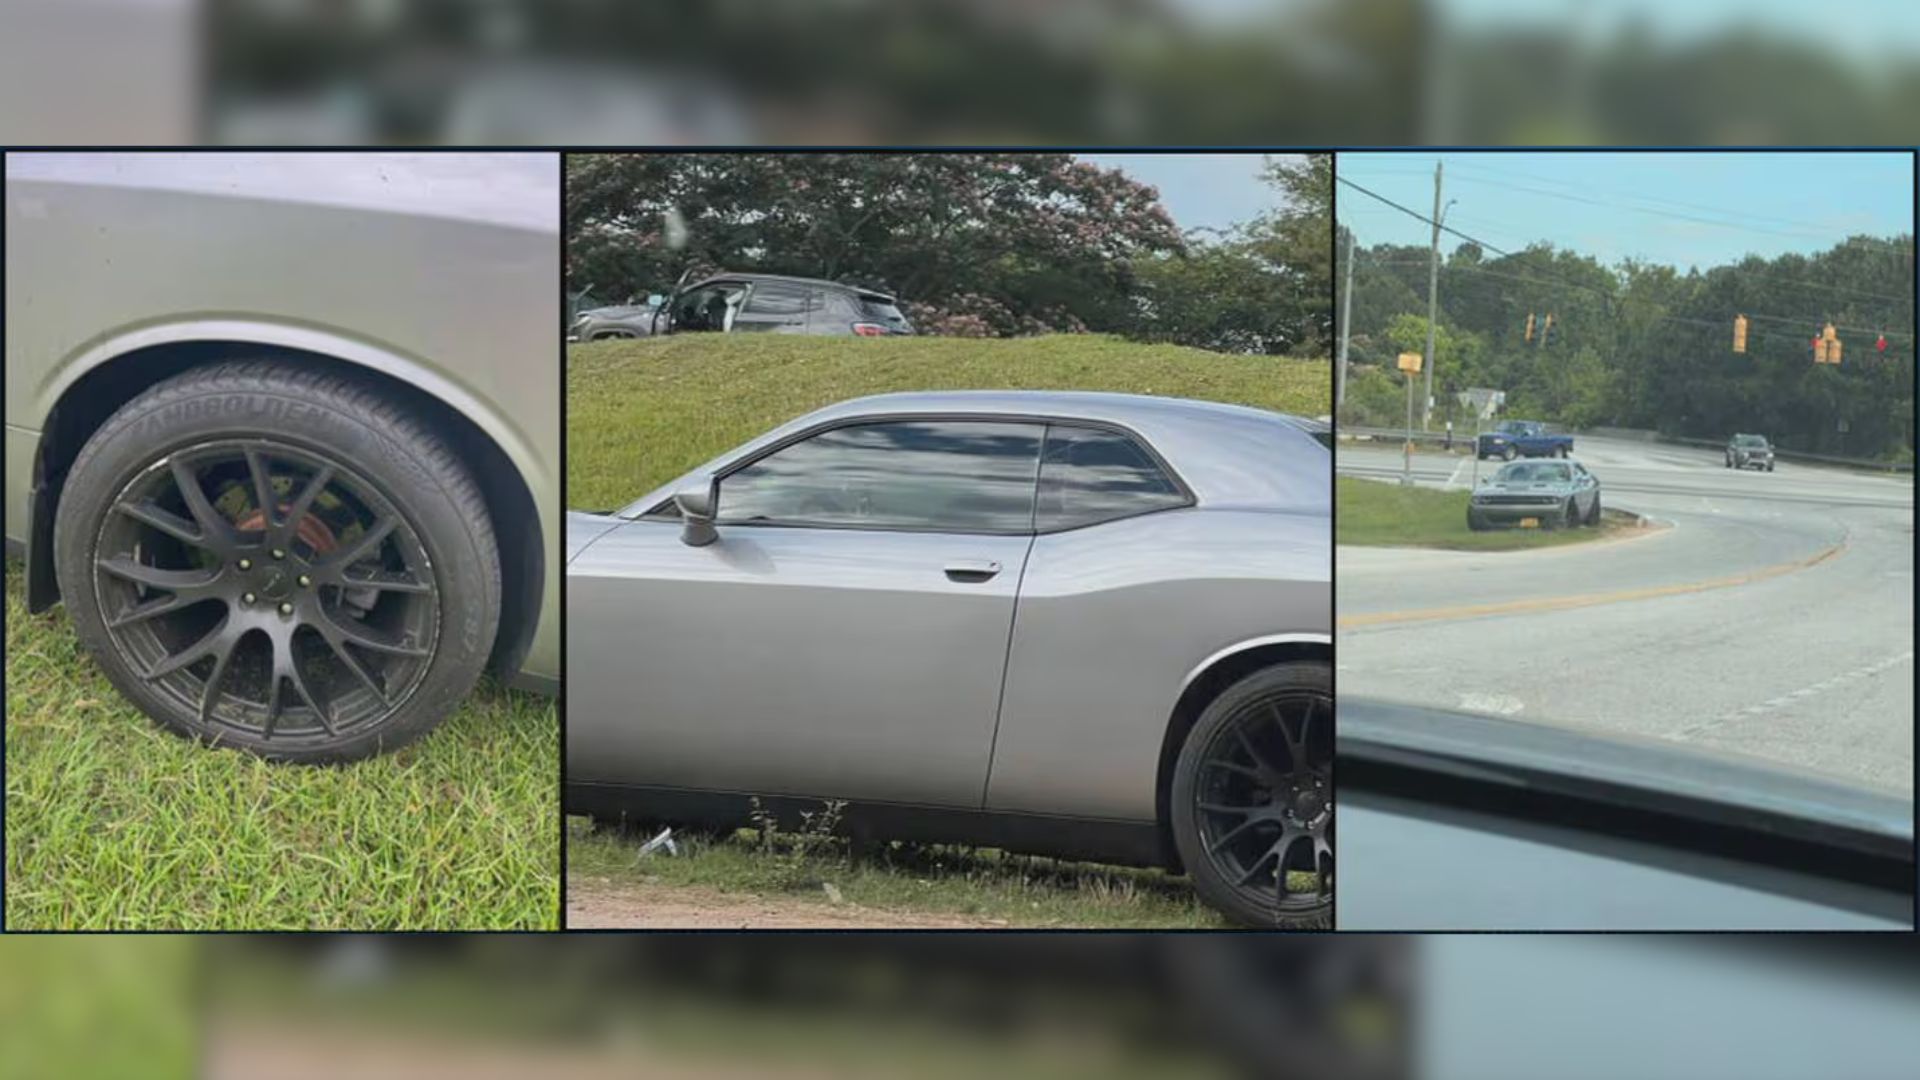 Dodge Challenger Owner Claims Valet Stole, Crashed His Muscle Car